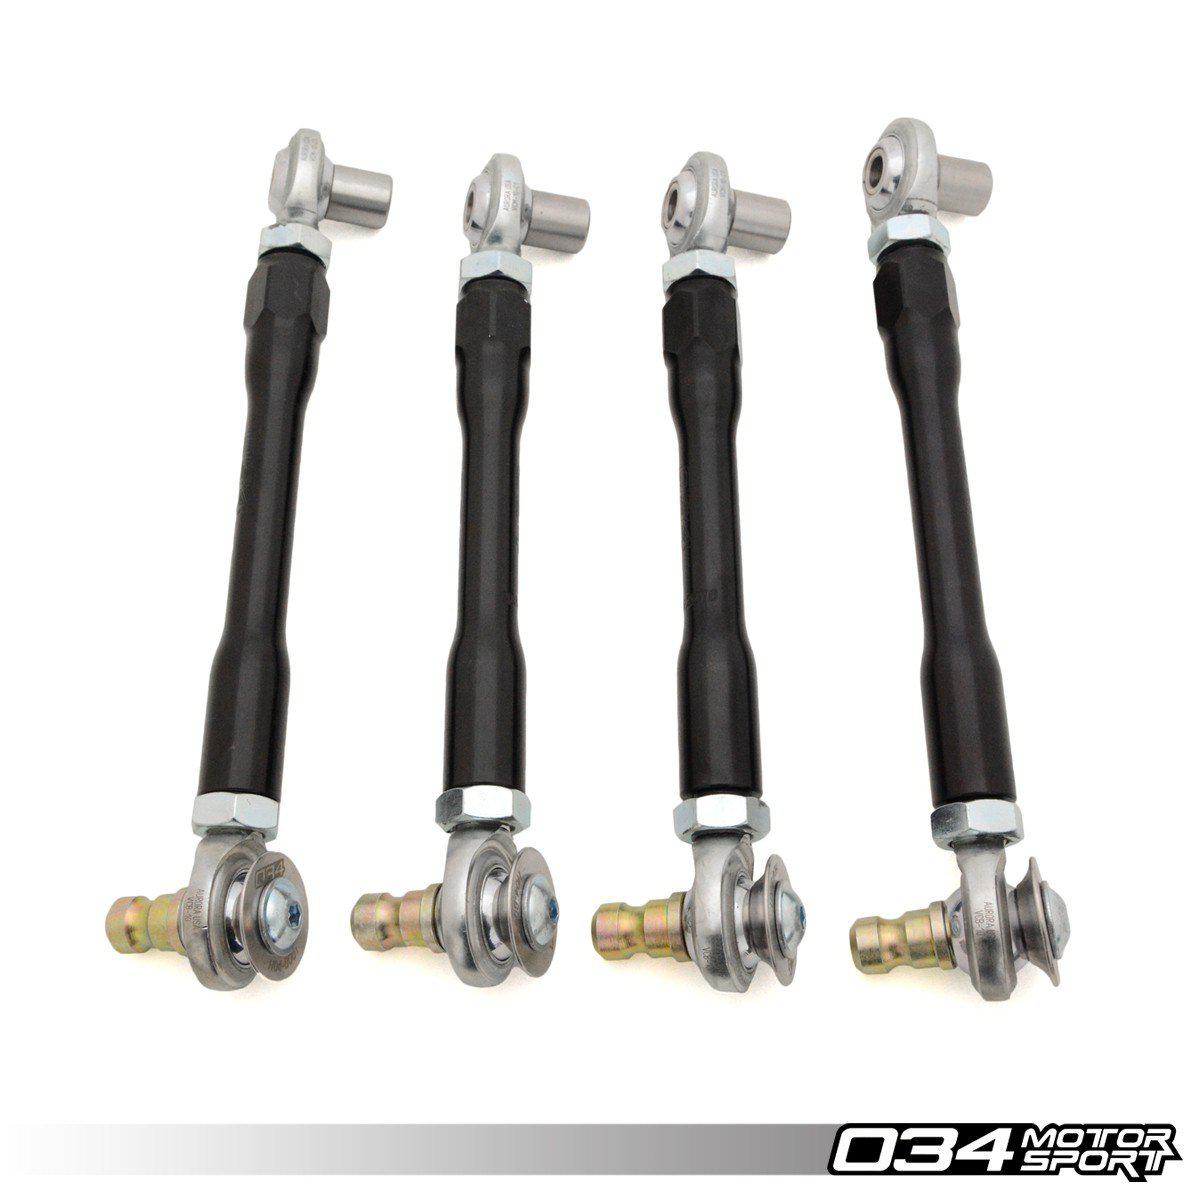 034Motorsport Adjustable Upper Control Arm Kit, Fully Spherical, Front B5/B6/B7-A Little Tuning Co